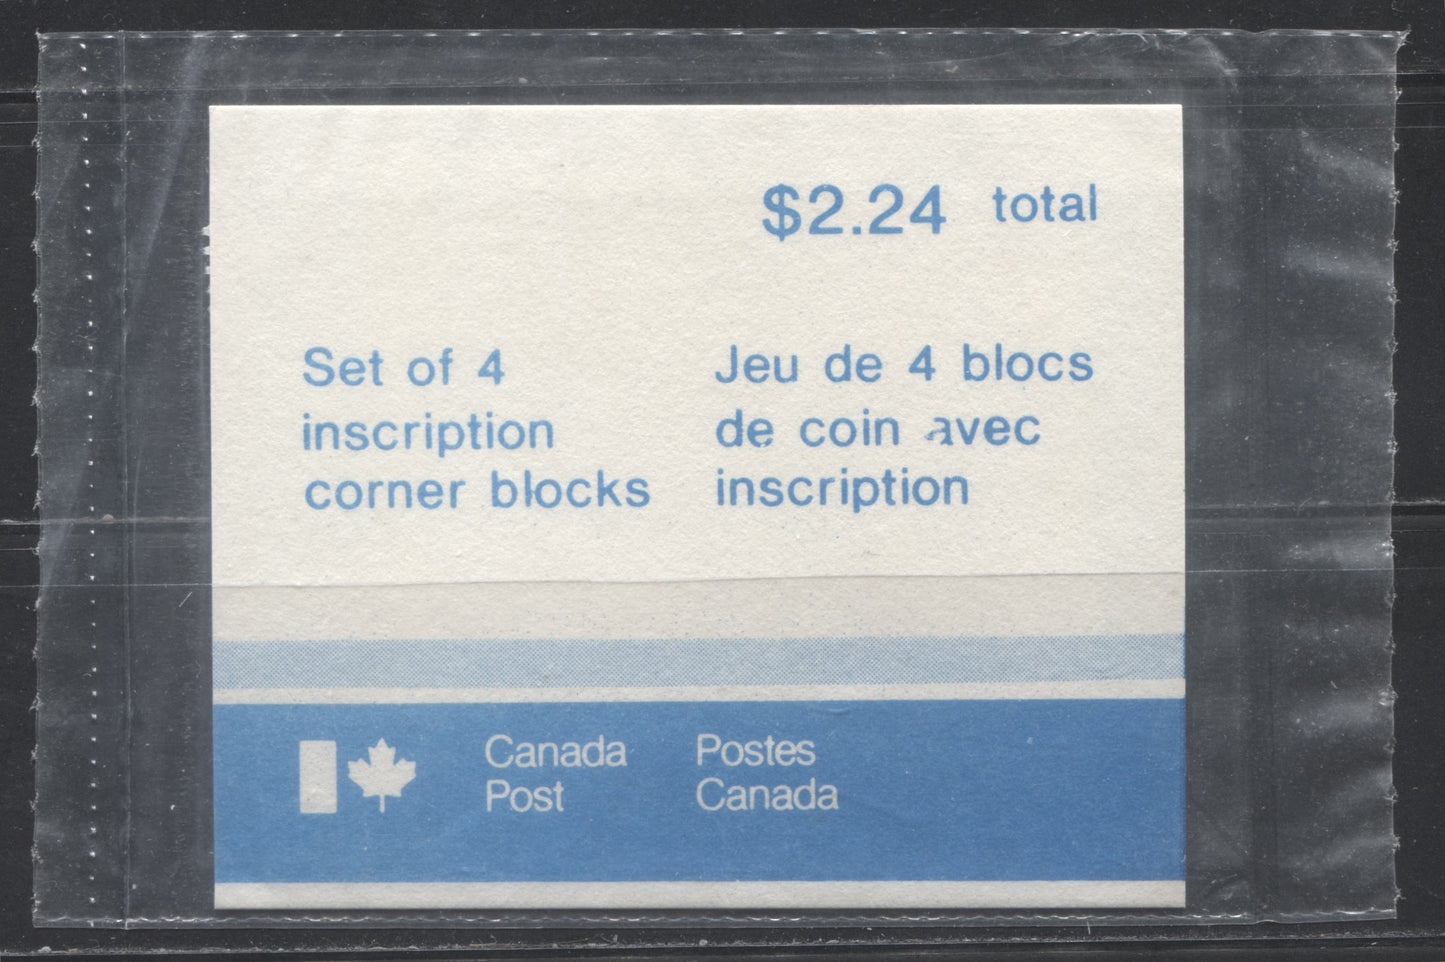 Canada #715, 715iv 14c Bright Red Parliament Buildings, 1977-1982 Floral & Environment Issue, Very Fine NH Sealed Pack of Plate 4 Blocks, DF Paper and Type 4b MF Light Blue Insert Card, Invisible Tagging and "Missing Brick" Variety on UL Block